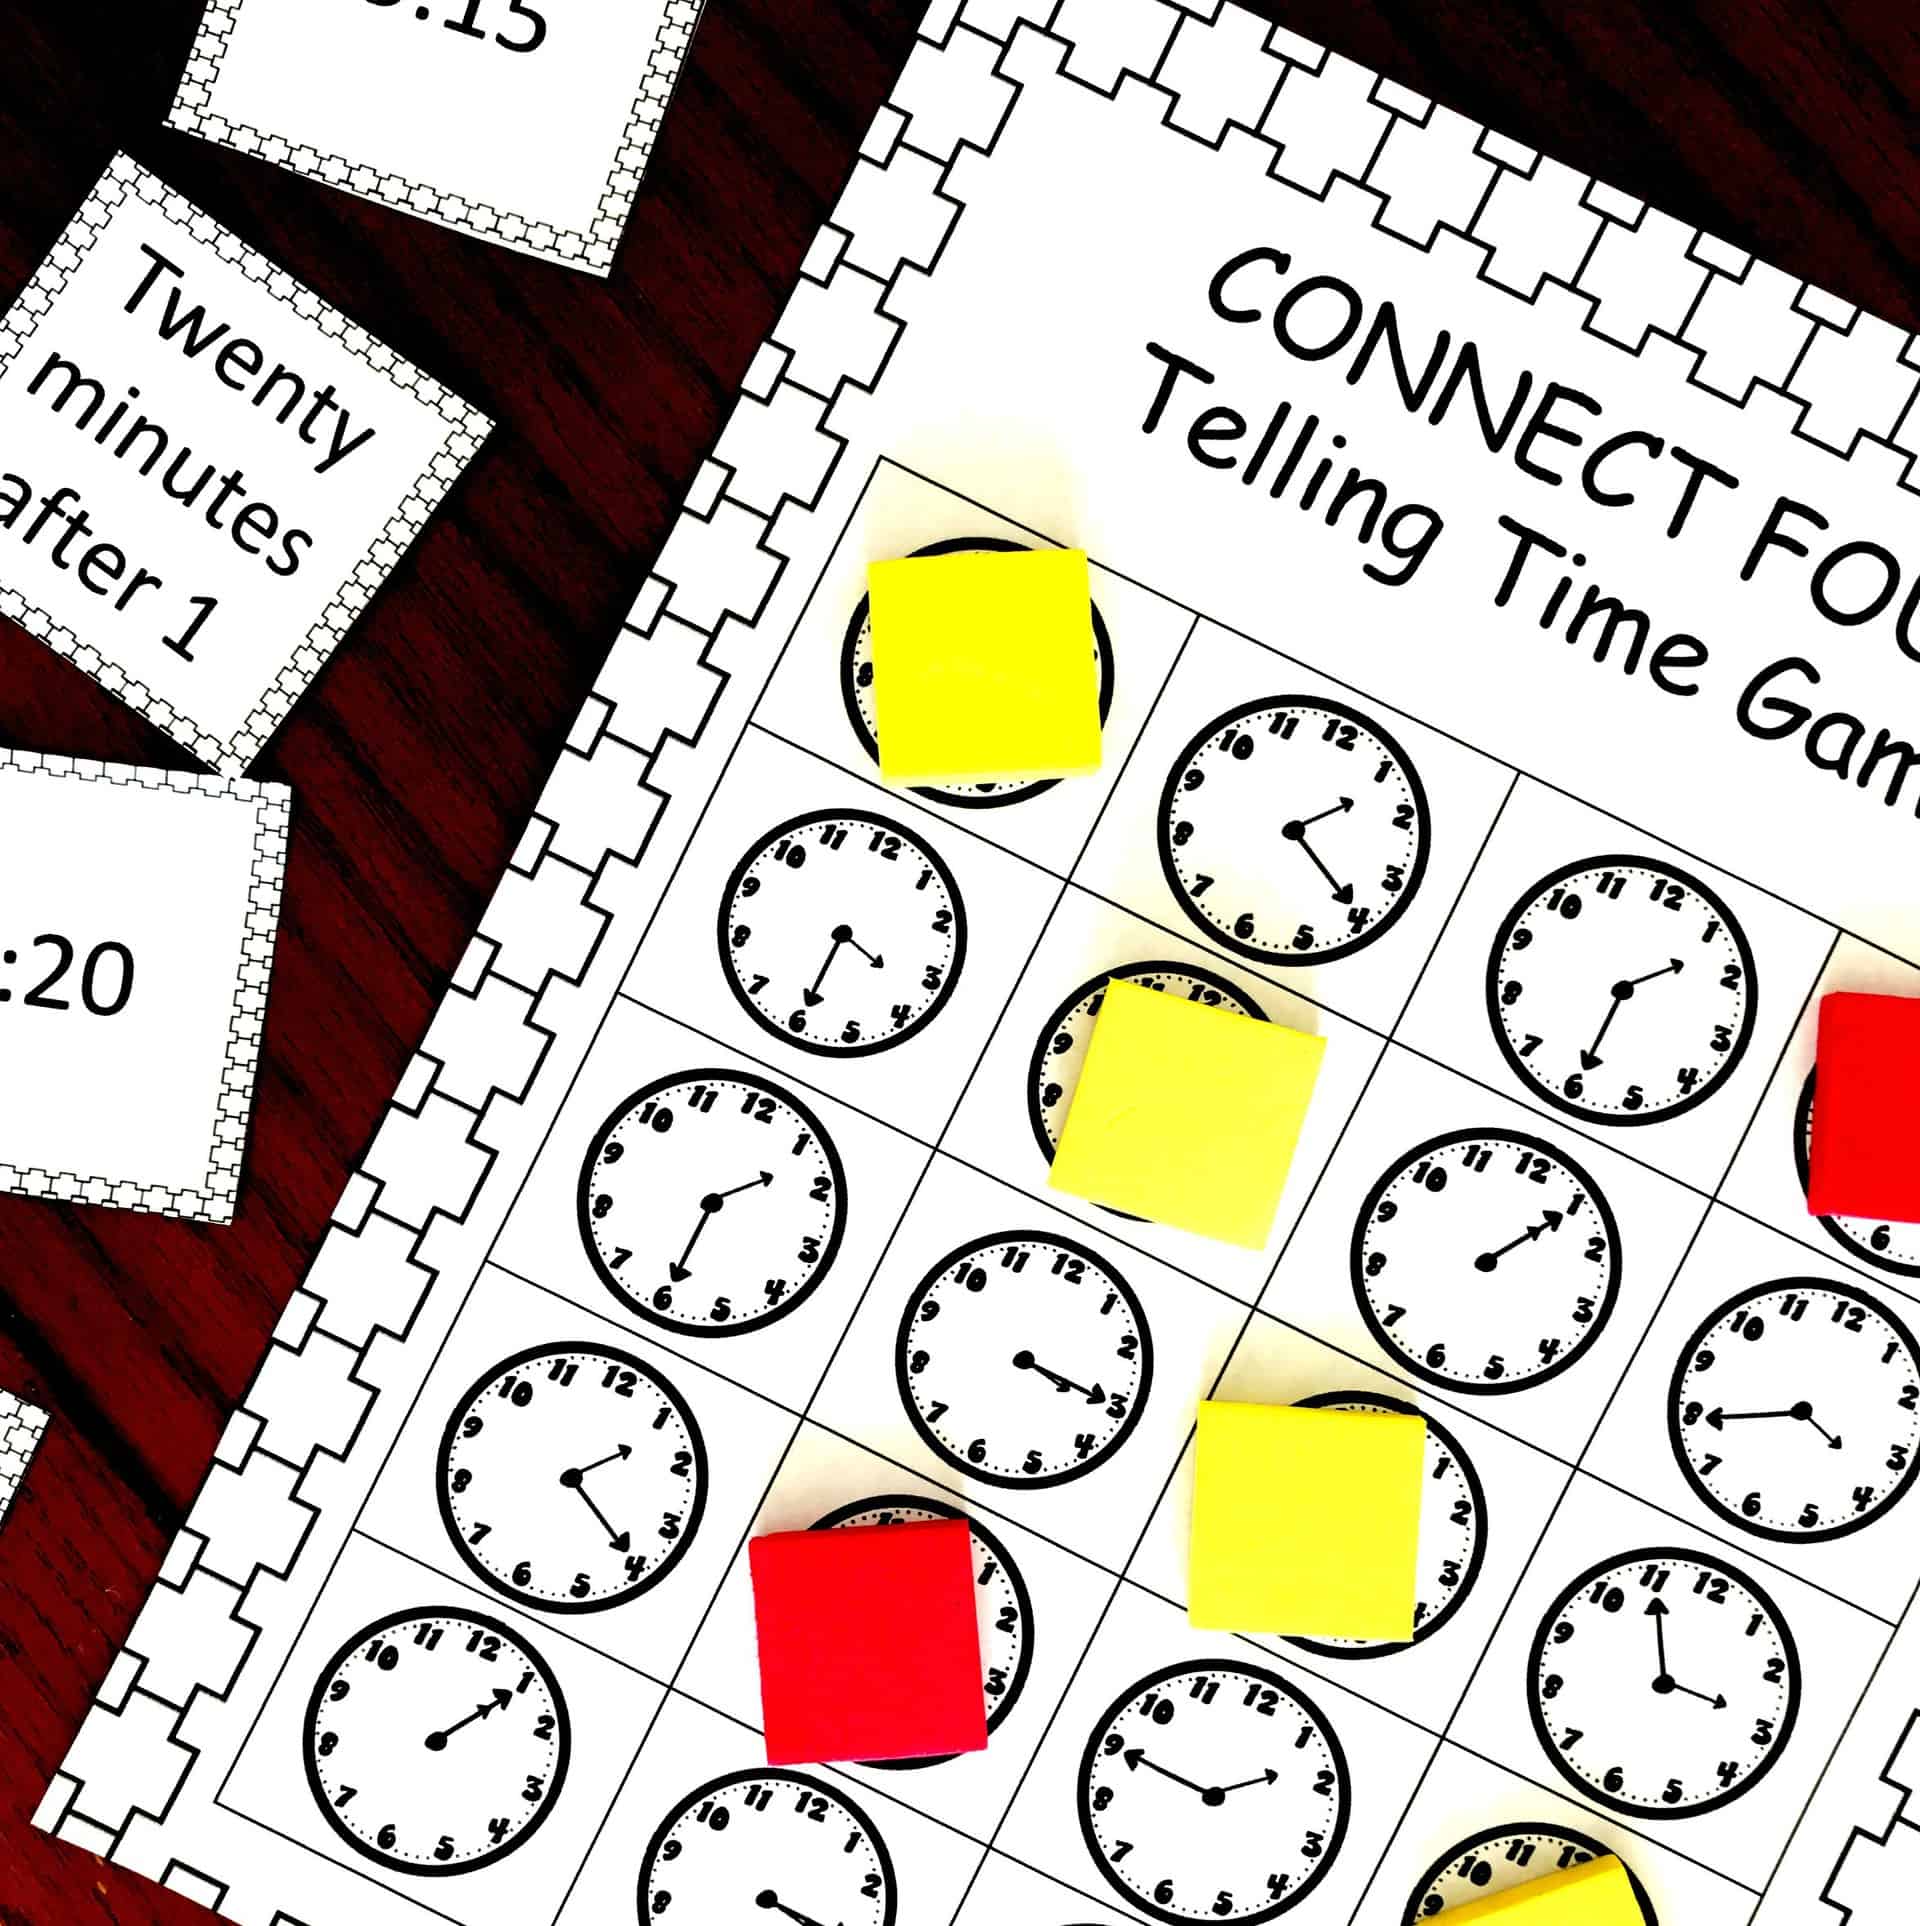 Time Games | Fun Easy Game to Practice Telling Time | Free Printable